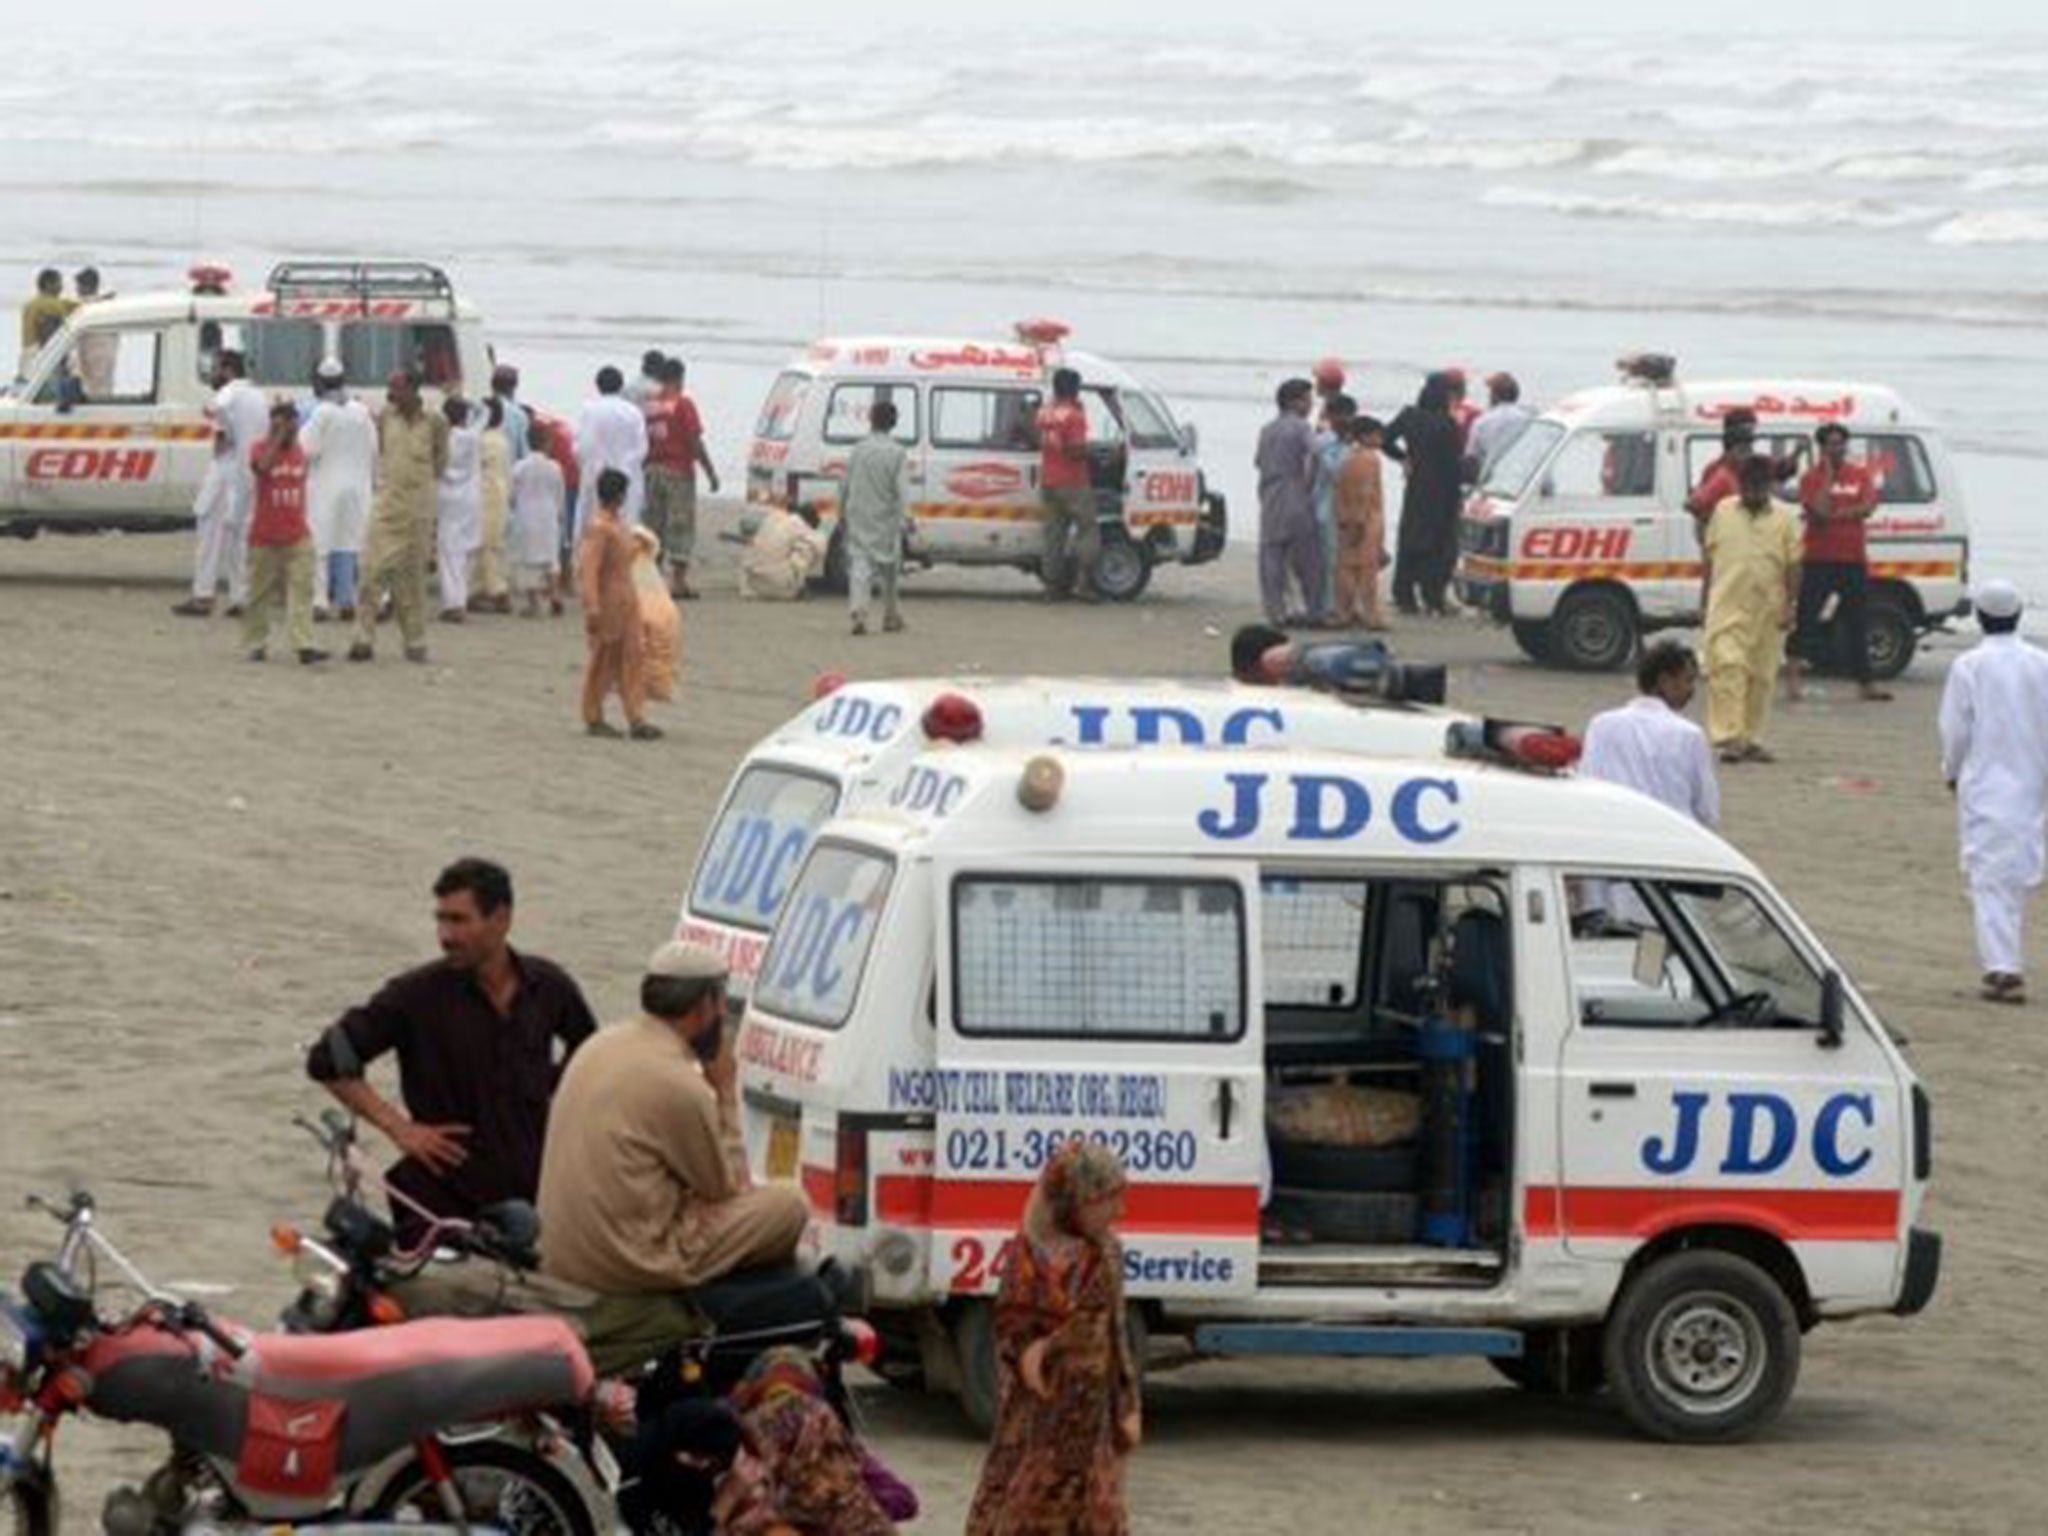 Ambulances are pictured at the beachfront during recovery operations in search of missing bathers at Clifton beach in Karachi